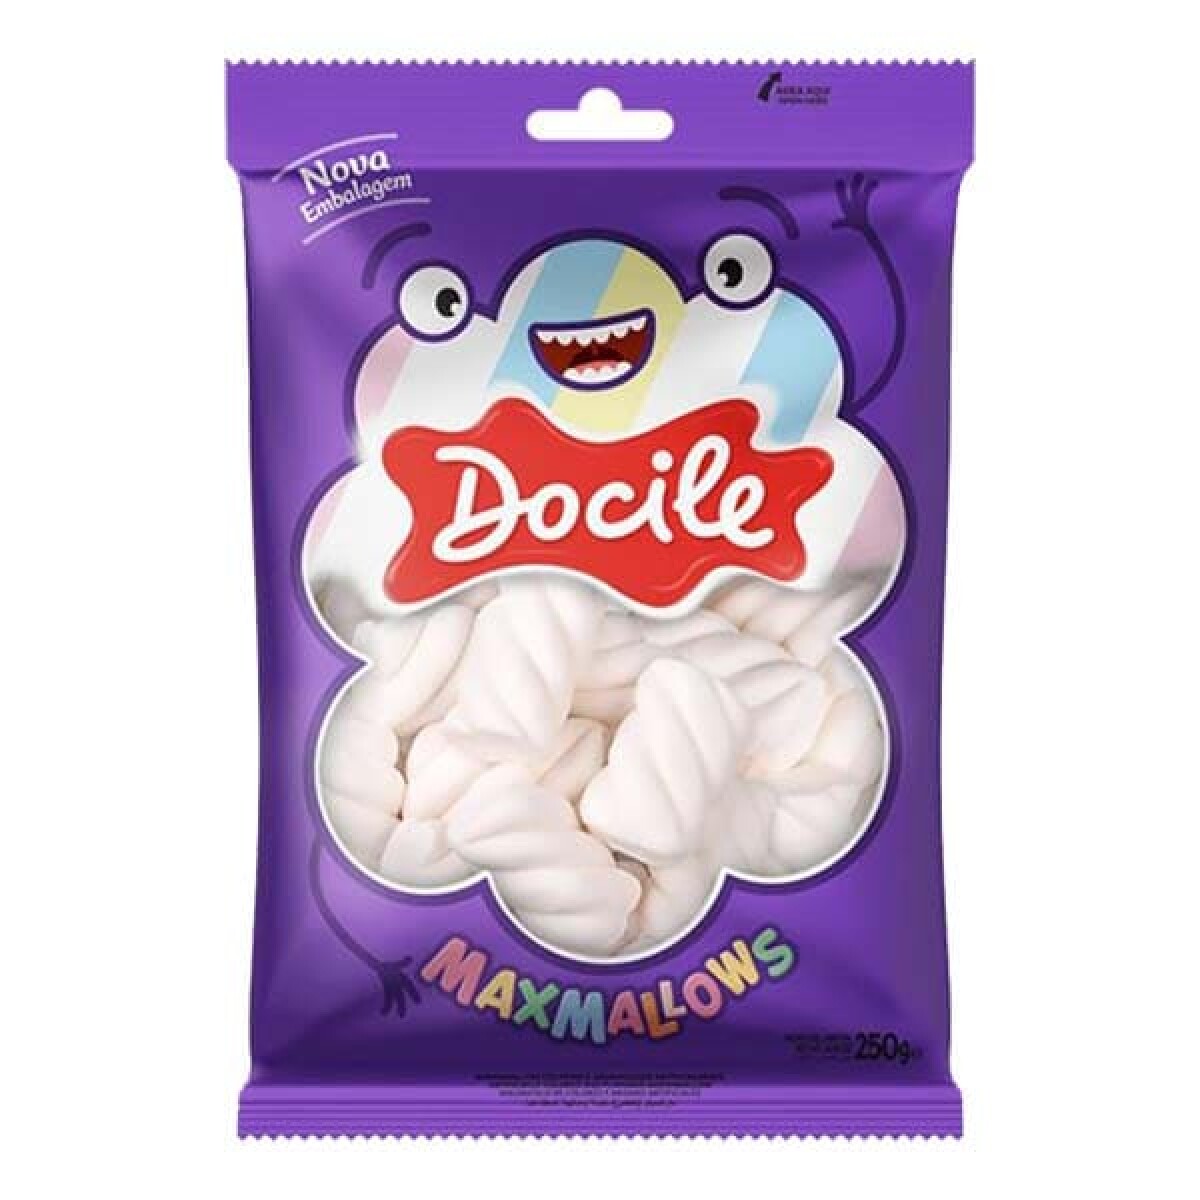 Marshmallow Docile 250 grs - Blanco 